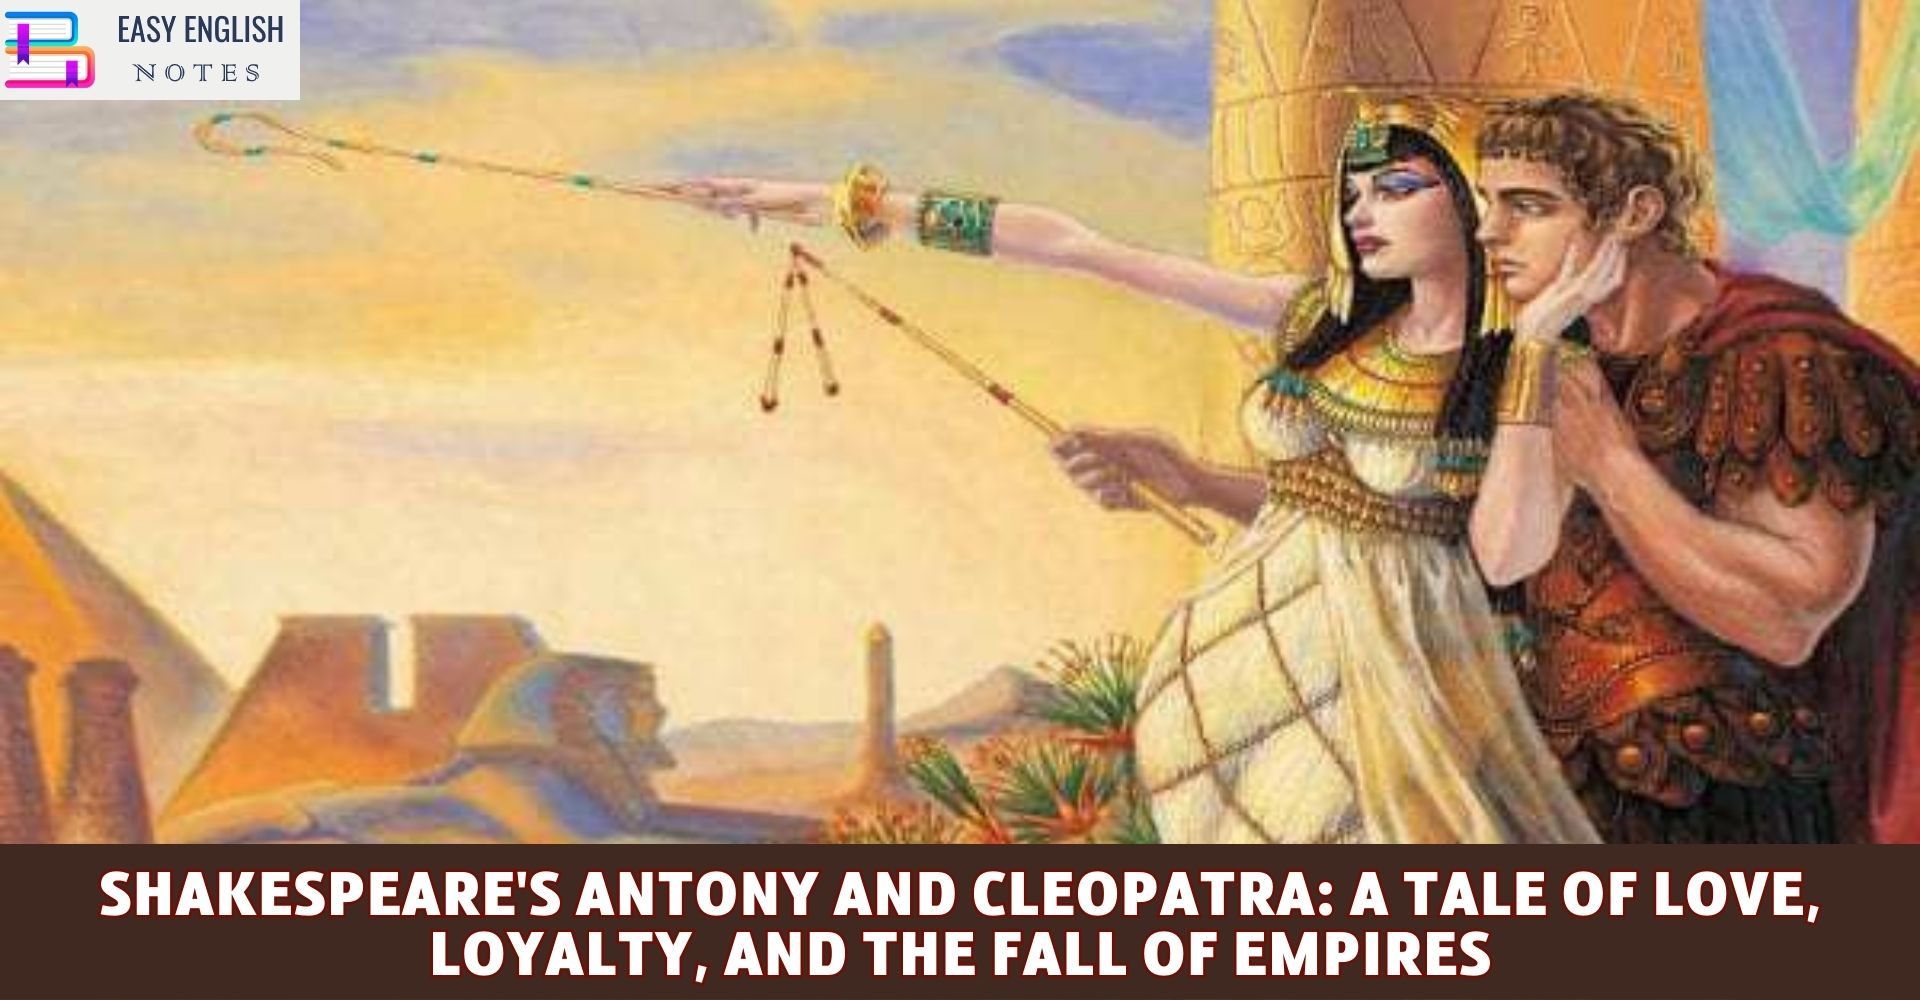 Shakespeare's Antony and Cleopatra: A Tale of Love, Loyalty, and the Fall of Empires